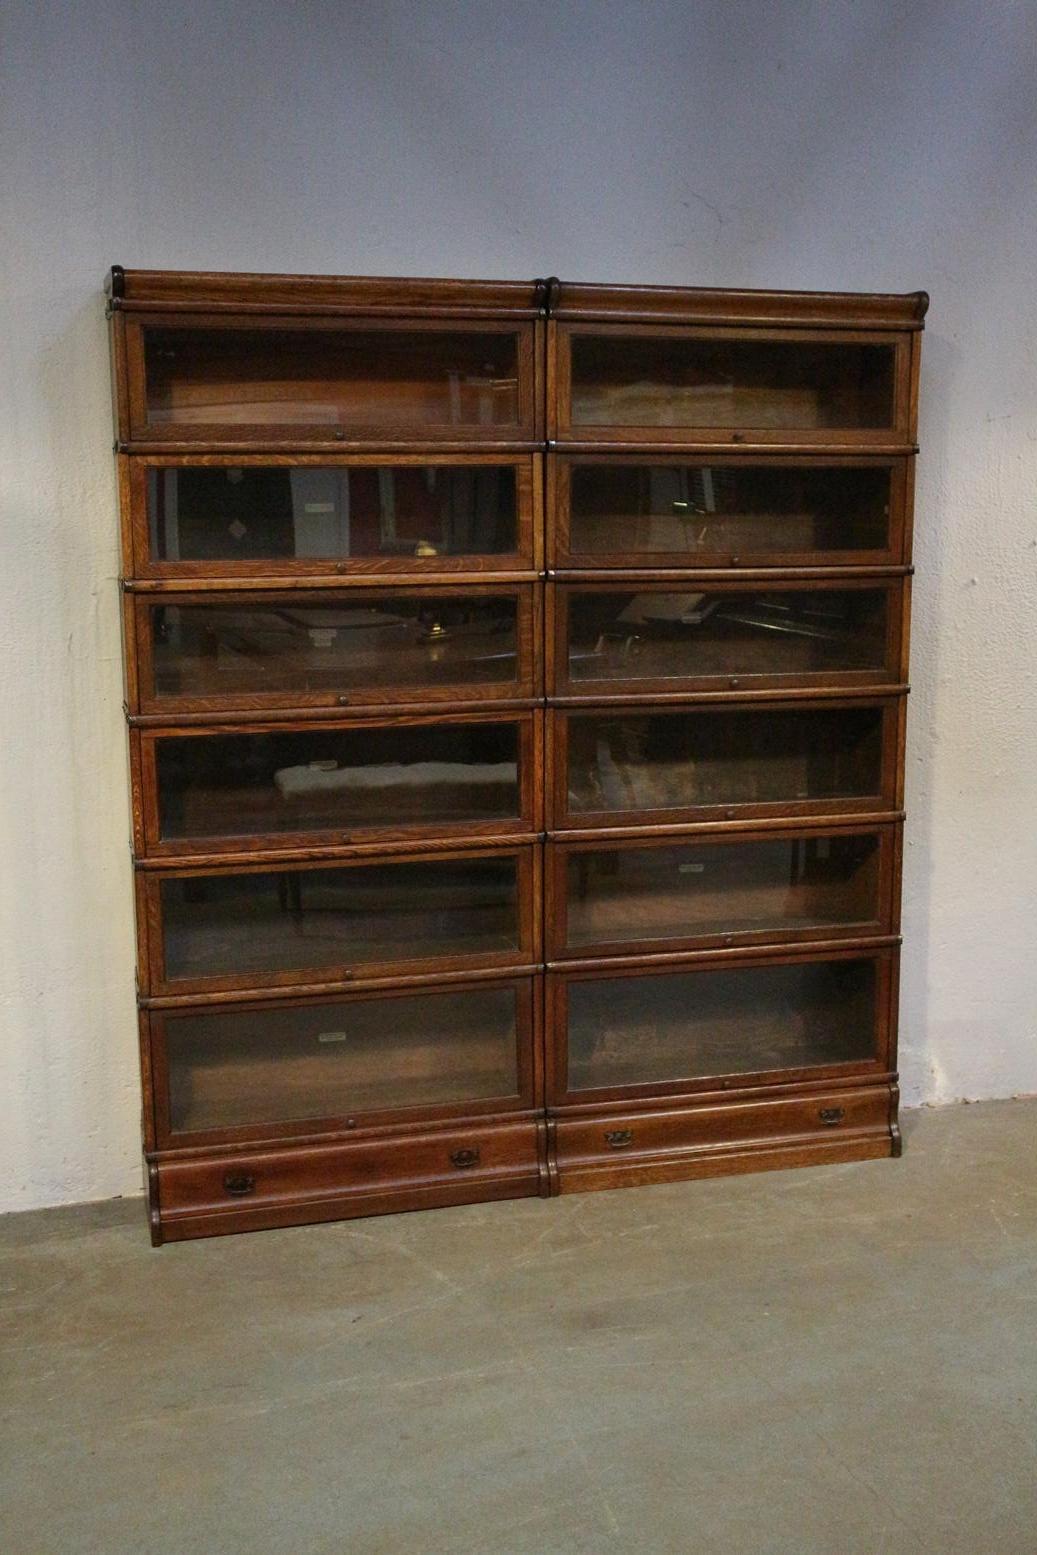 Oak globe Wernicke bookcase in very good and original condition. The cabinet consists of 12 stackable parts with 2 feet with drawers and 2 caps.
Origin: England
Period: Approximate 1895-1910
Size: Br 173 cm, D 24 cm, H 198 cm.